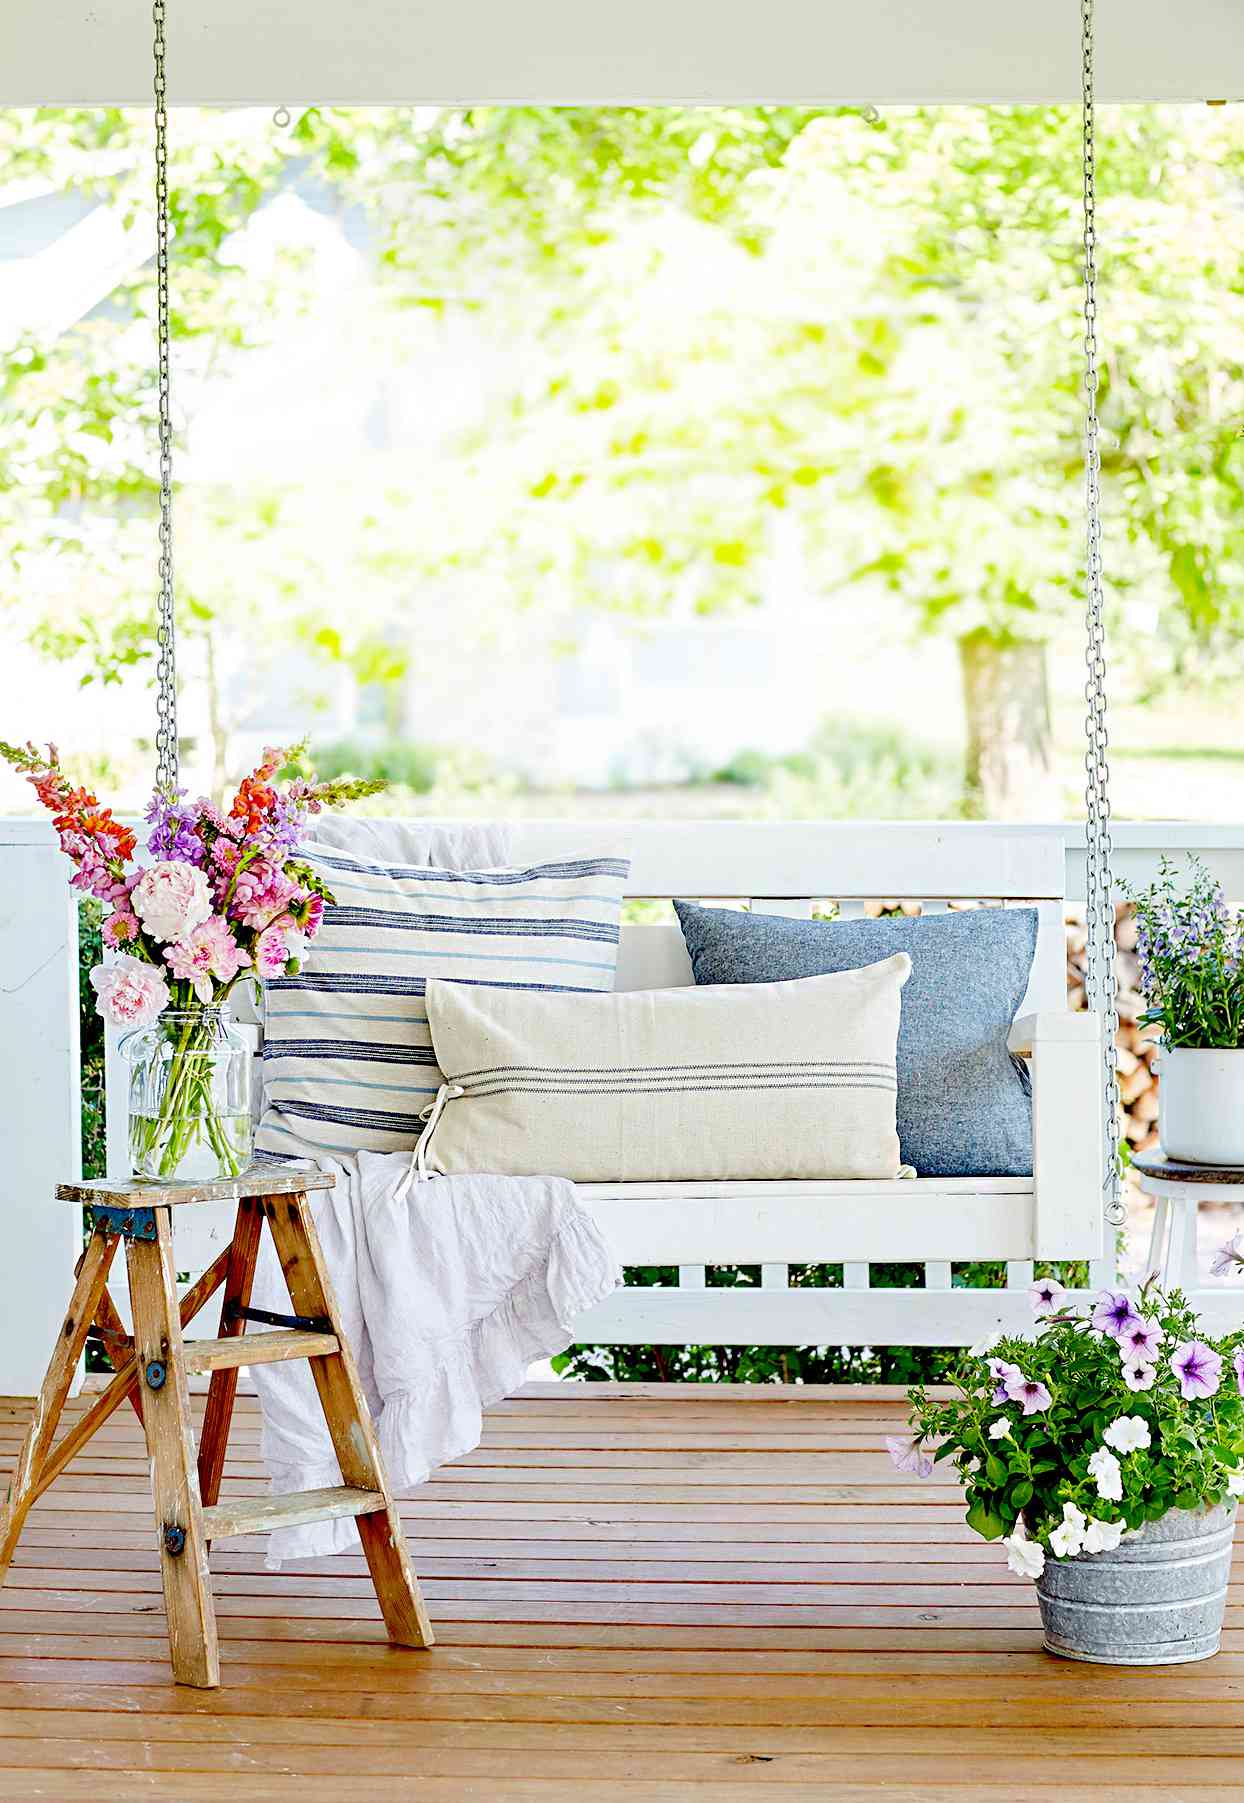 12 Stylish Ideas To Make The Most Of A Small Front Porch Better Homes Gardens,Apparel Design Software